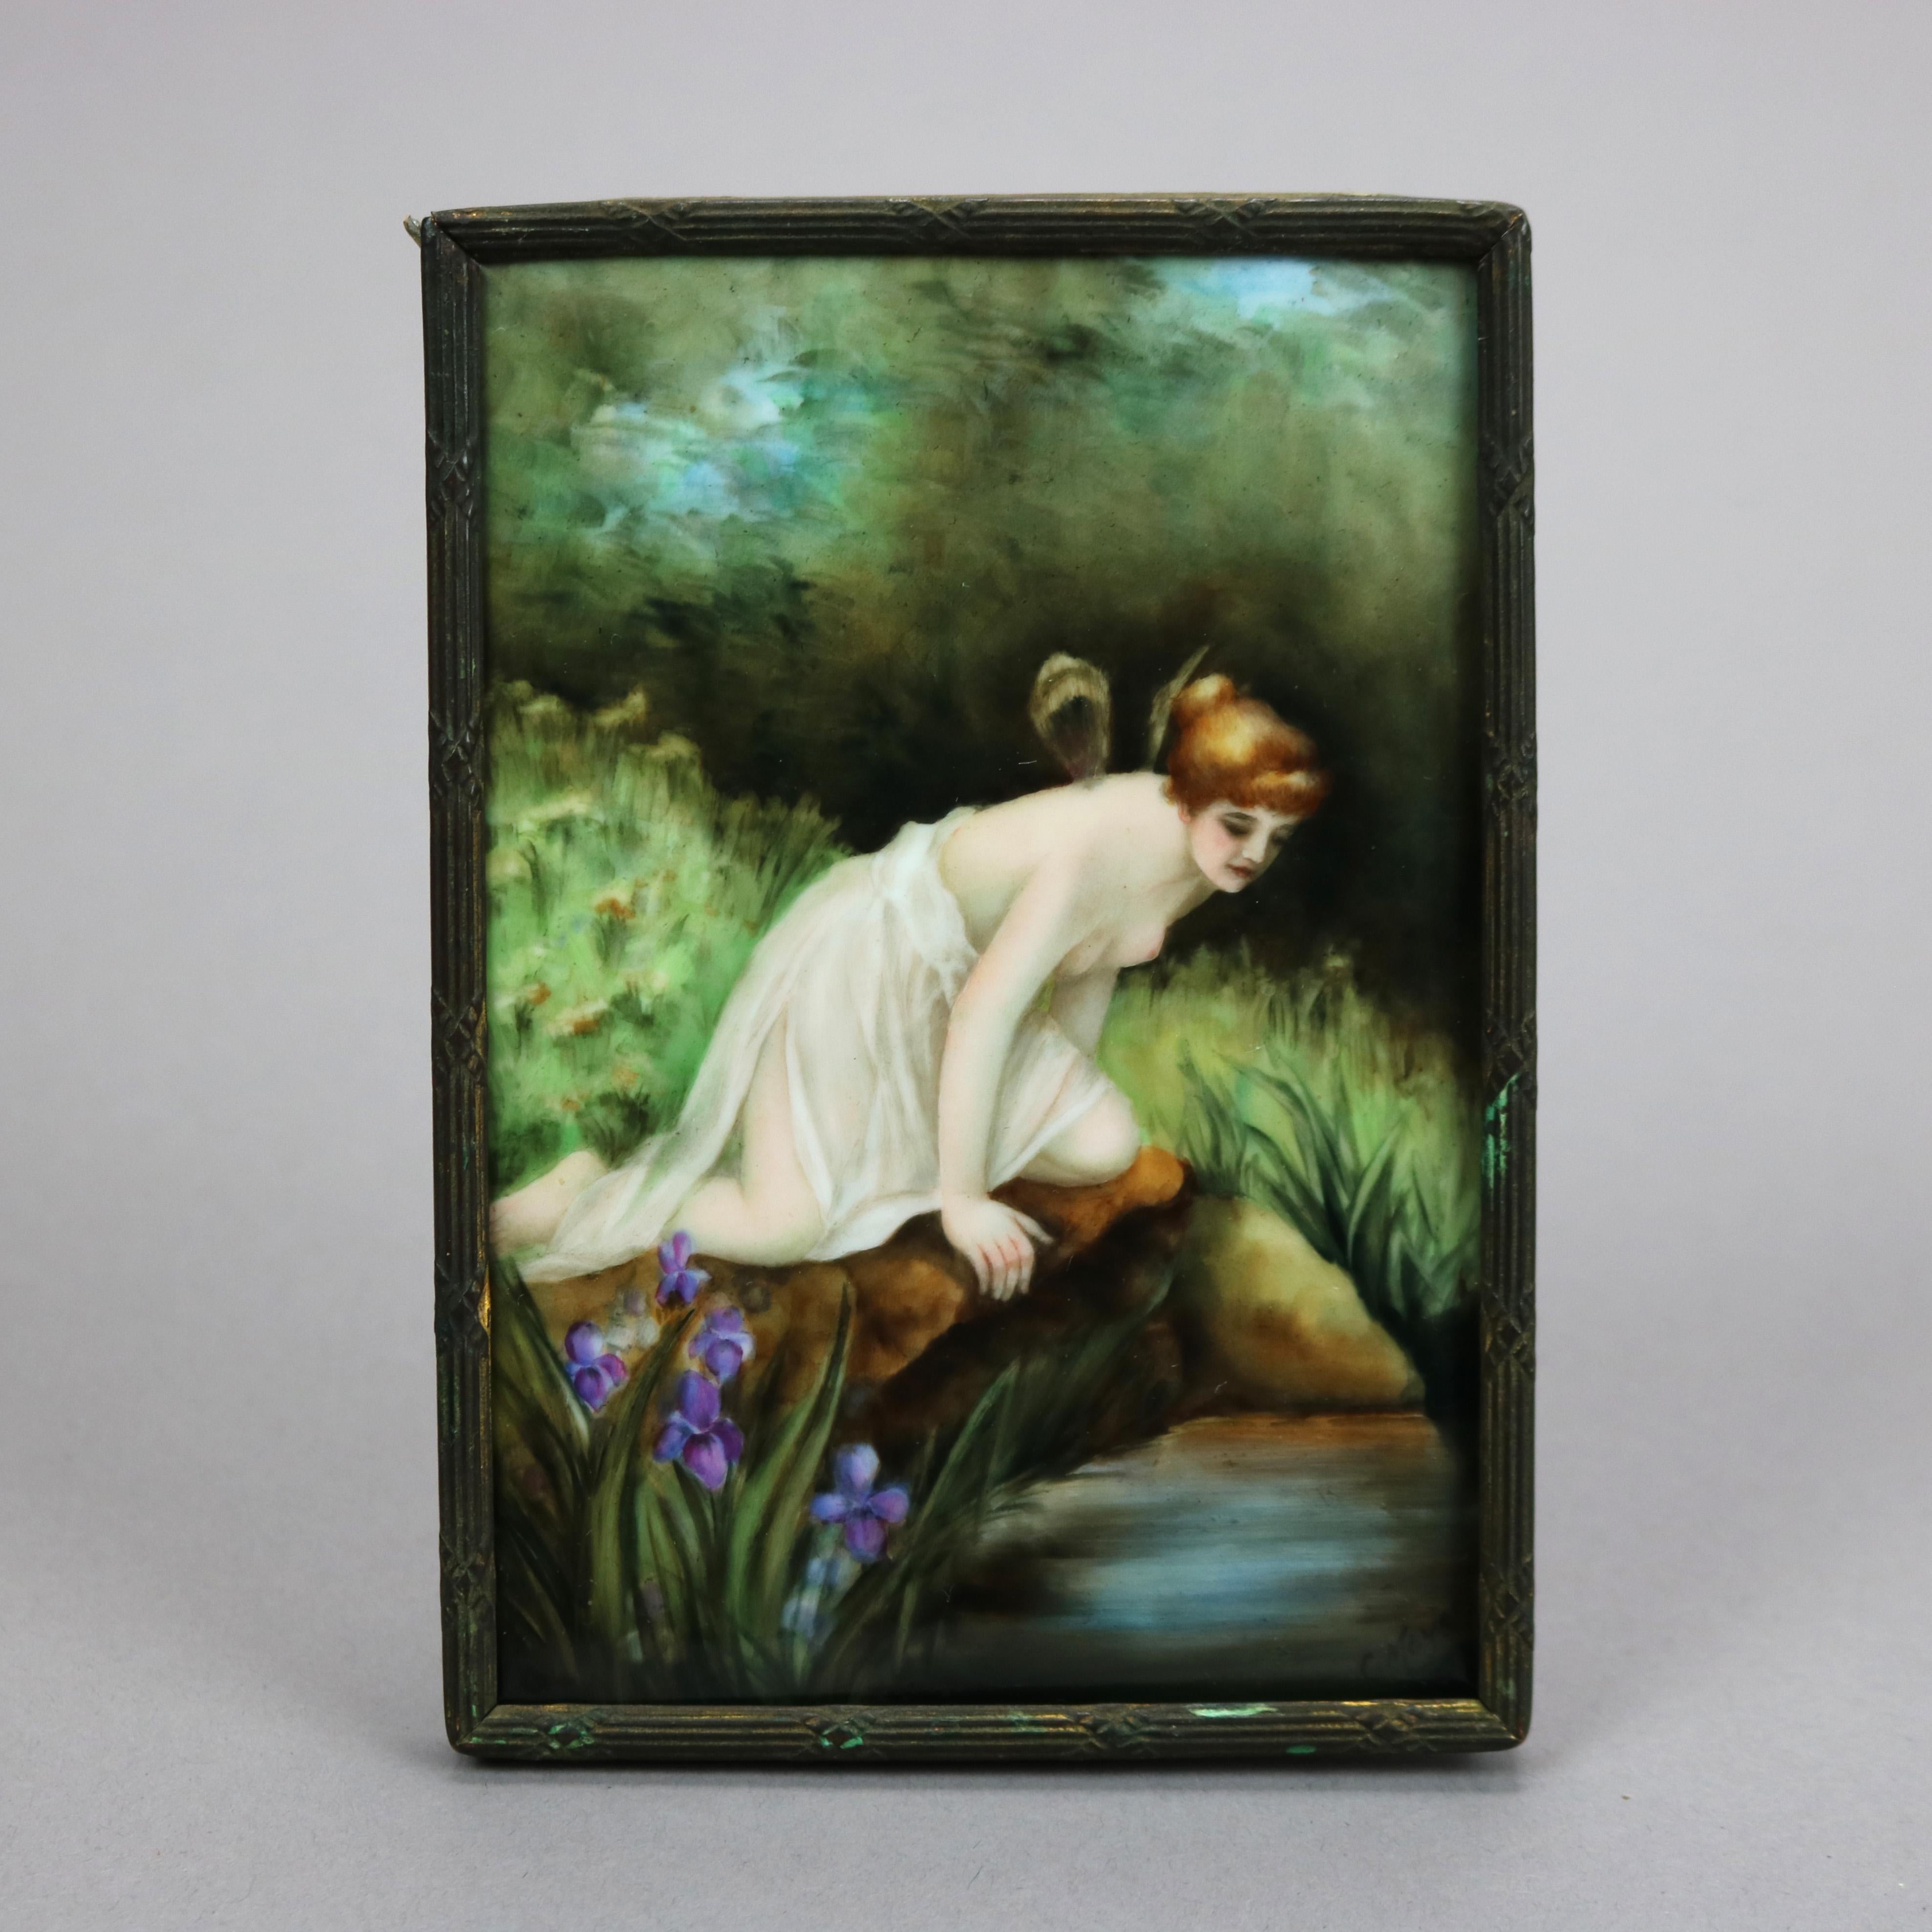 An antique painting on porcelain by C. Meyer offers portrait of Narcissus admiring herself in the reflection of the stream, artist signed lower right, seated in tabletop frame with stand, c1900

Measures - 6''H X 4.25''W X .5''D

Additional